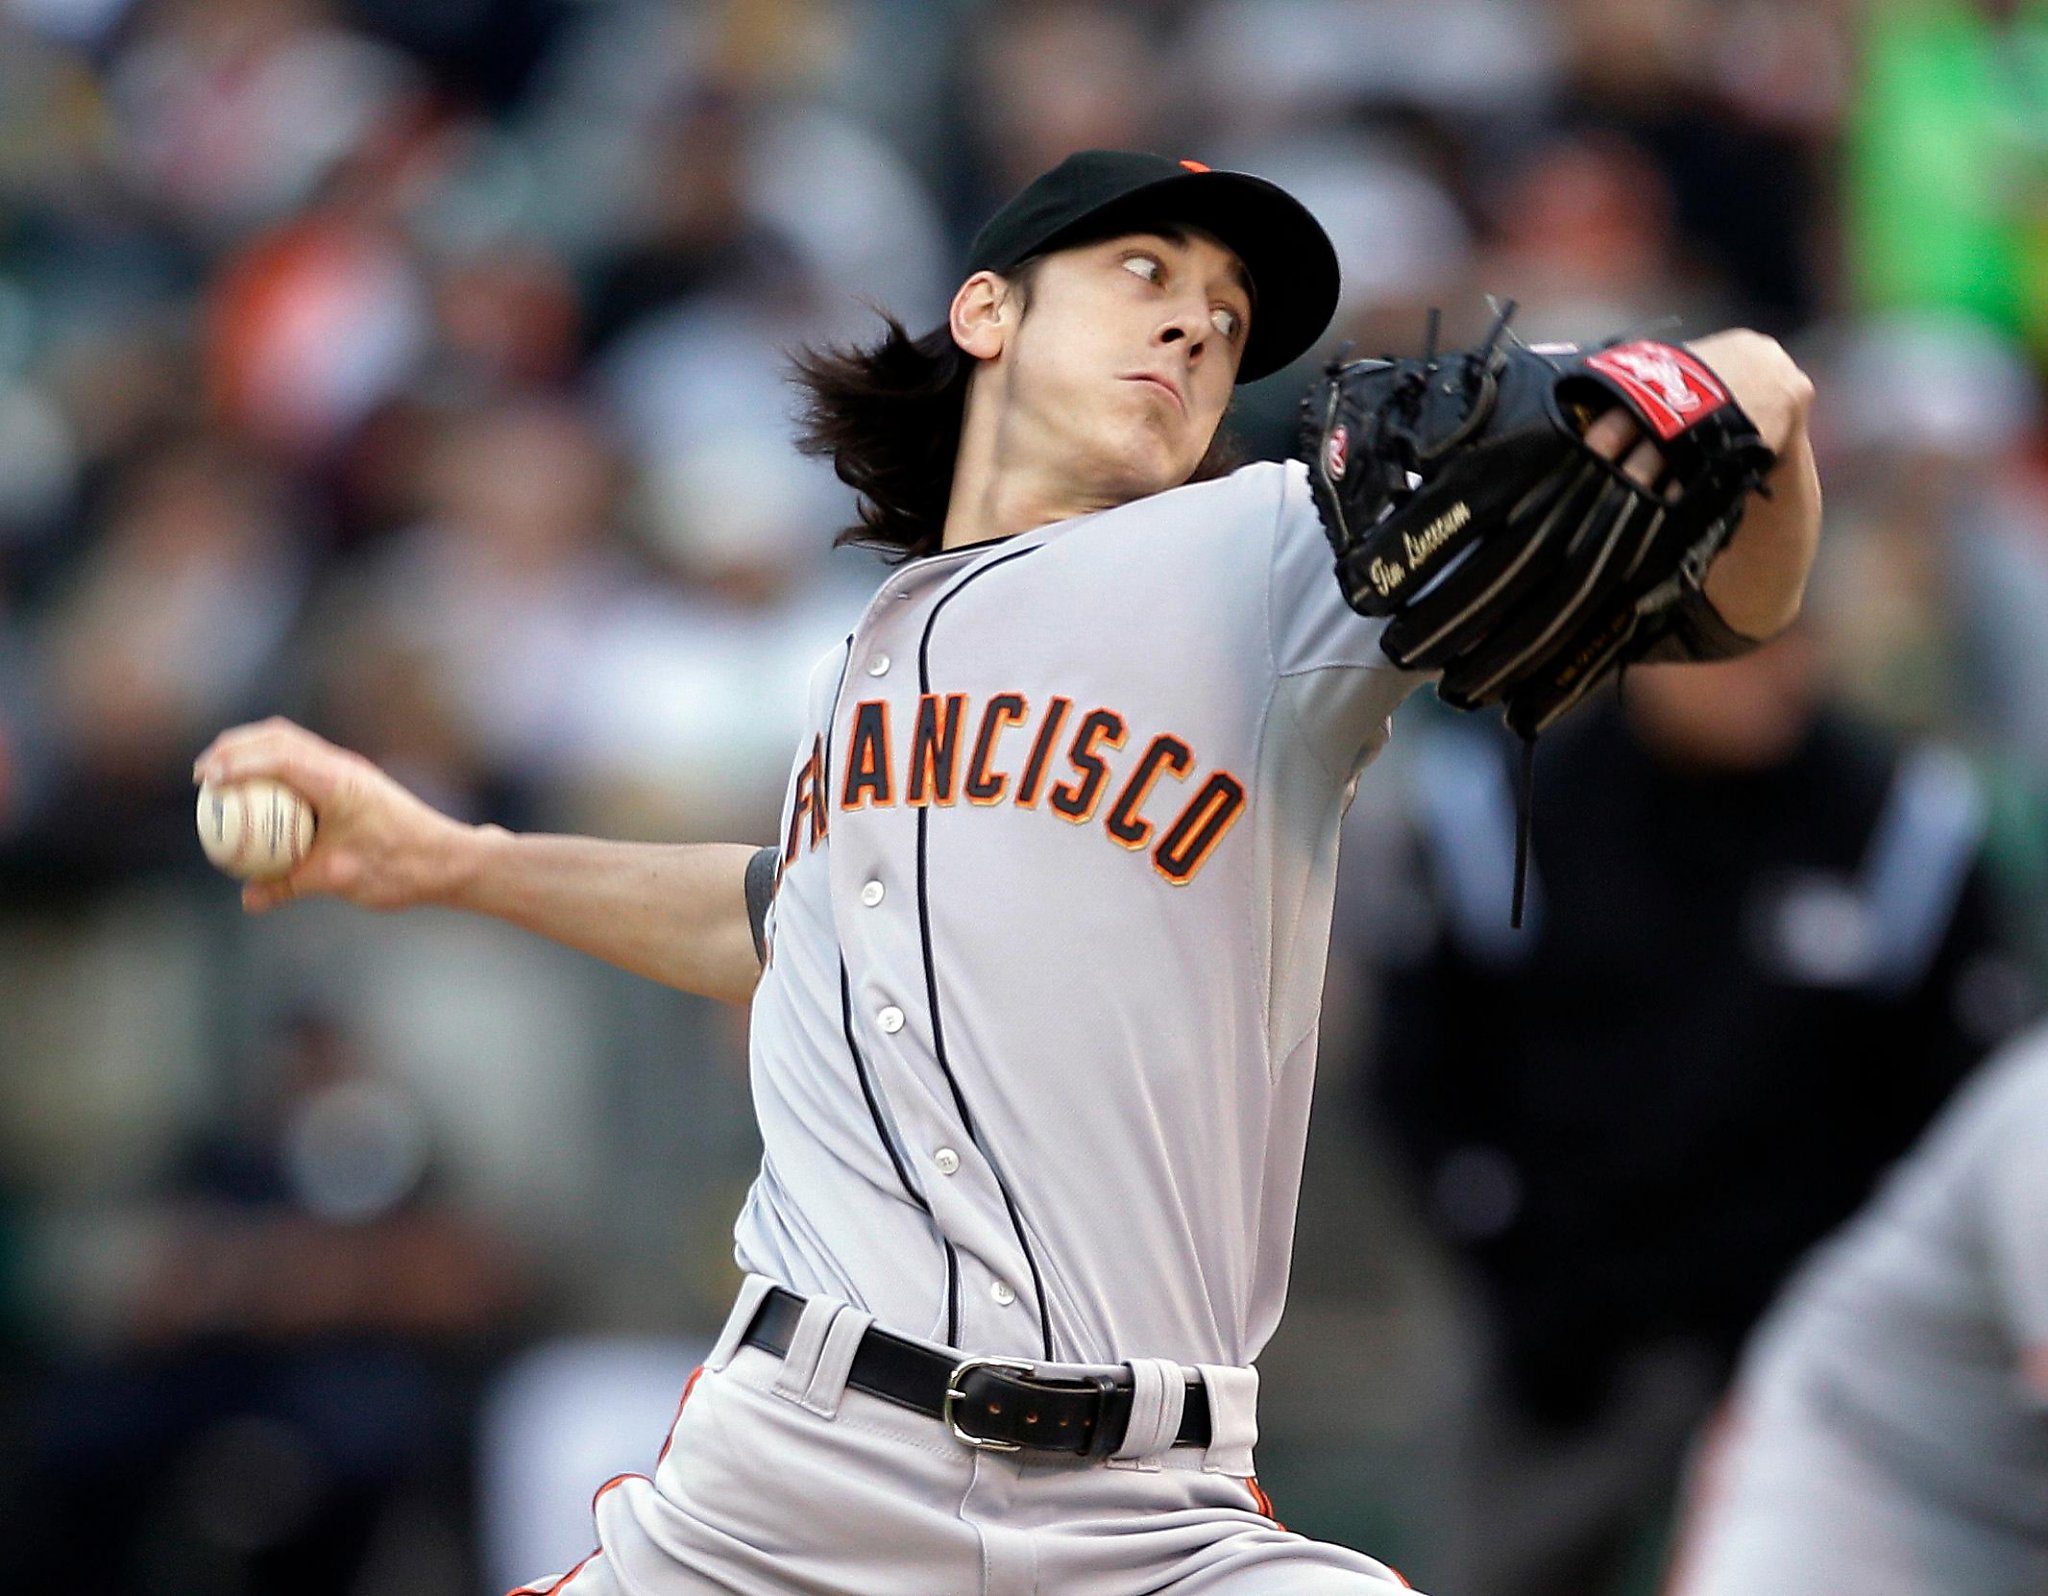 Finding Tim Lincecum: Check out what the ex-Giants star looks like now –  East Bay Times